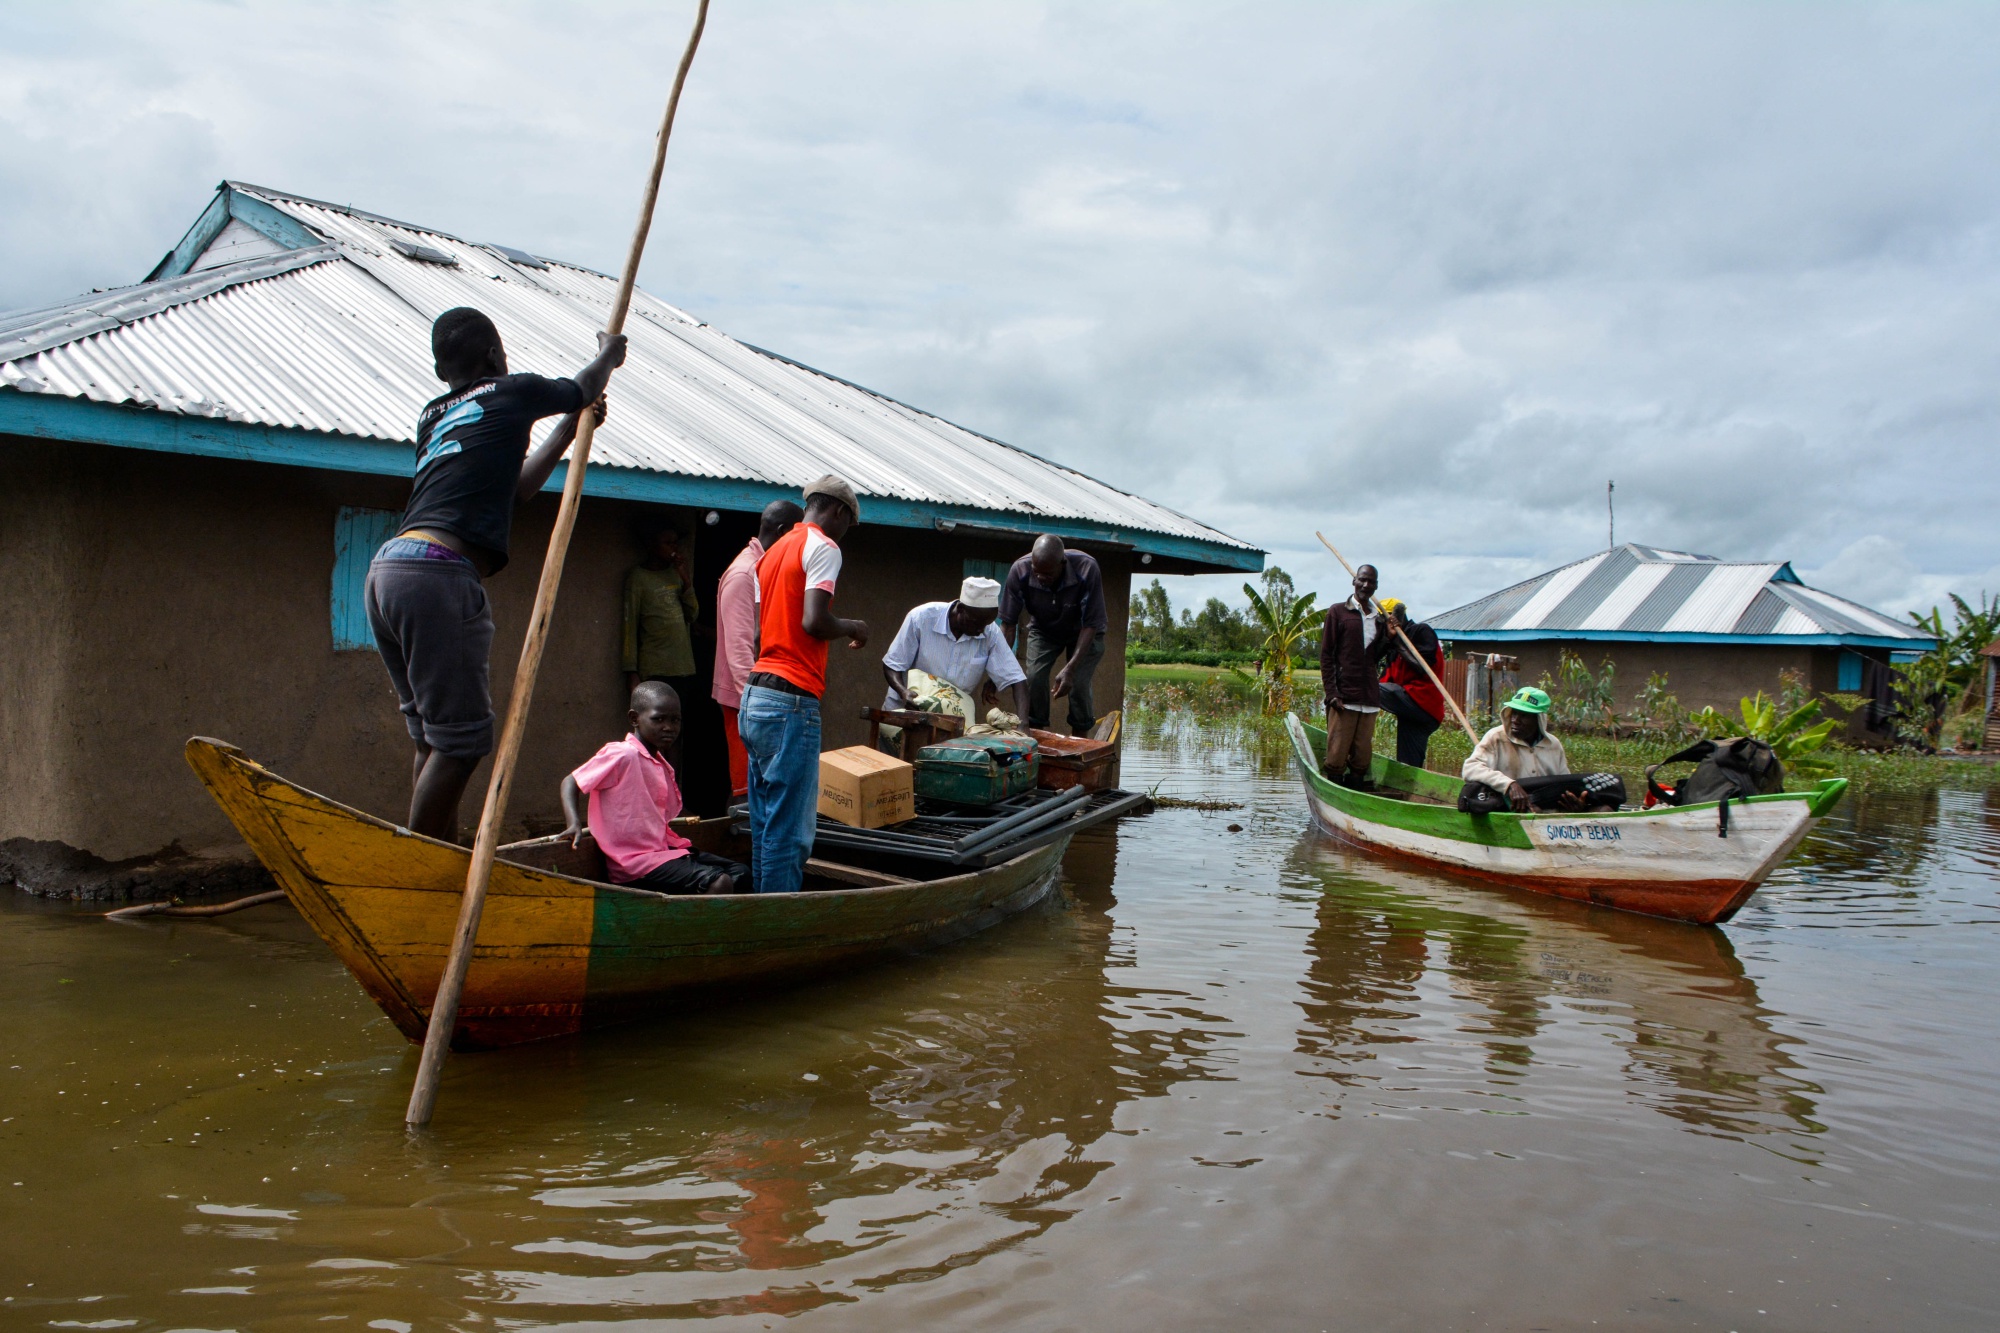 Families are evacuated after their houses were flooded in Kisumu, Kenya on Dec. 3.